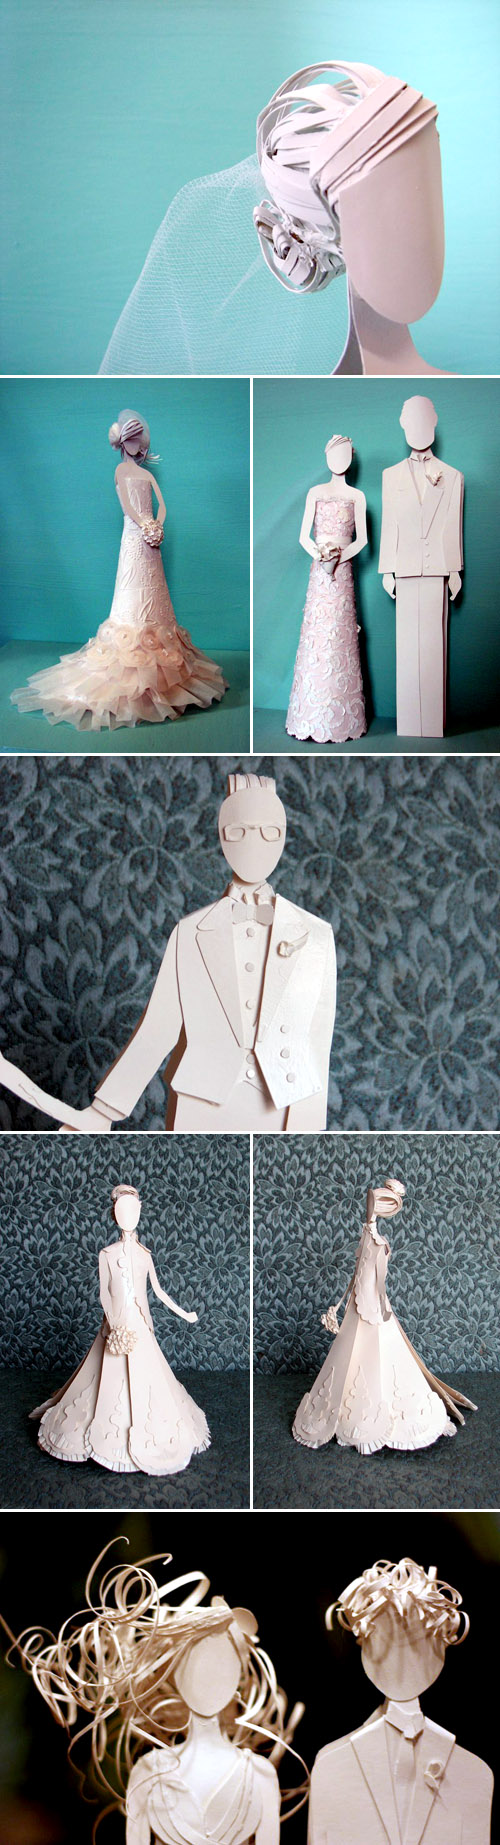 paper wedding cake topper and custom paper wedding dresses by Paper, Gowns and Glory